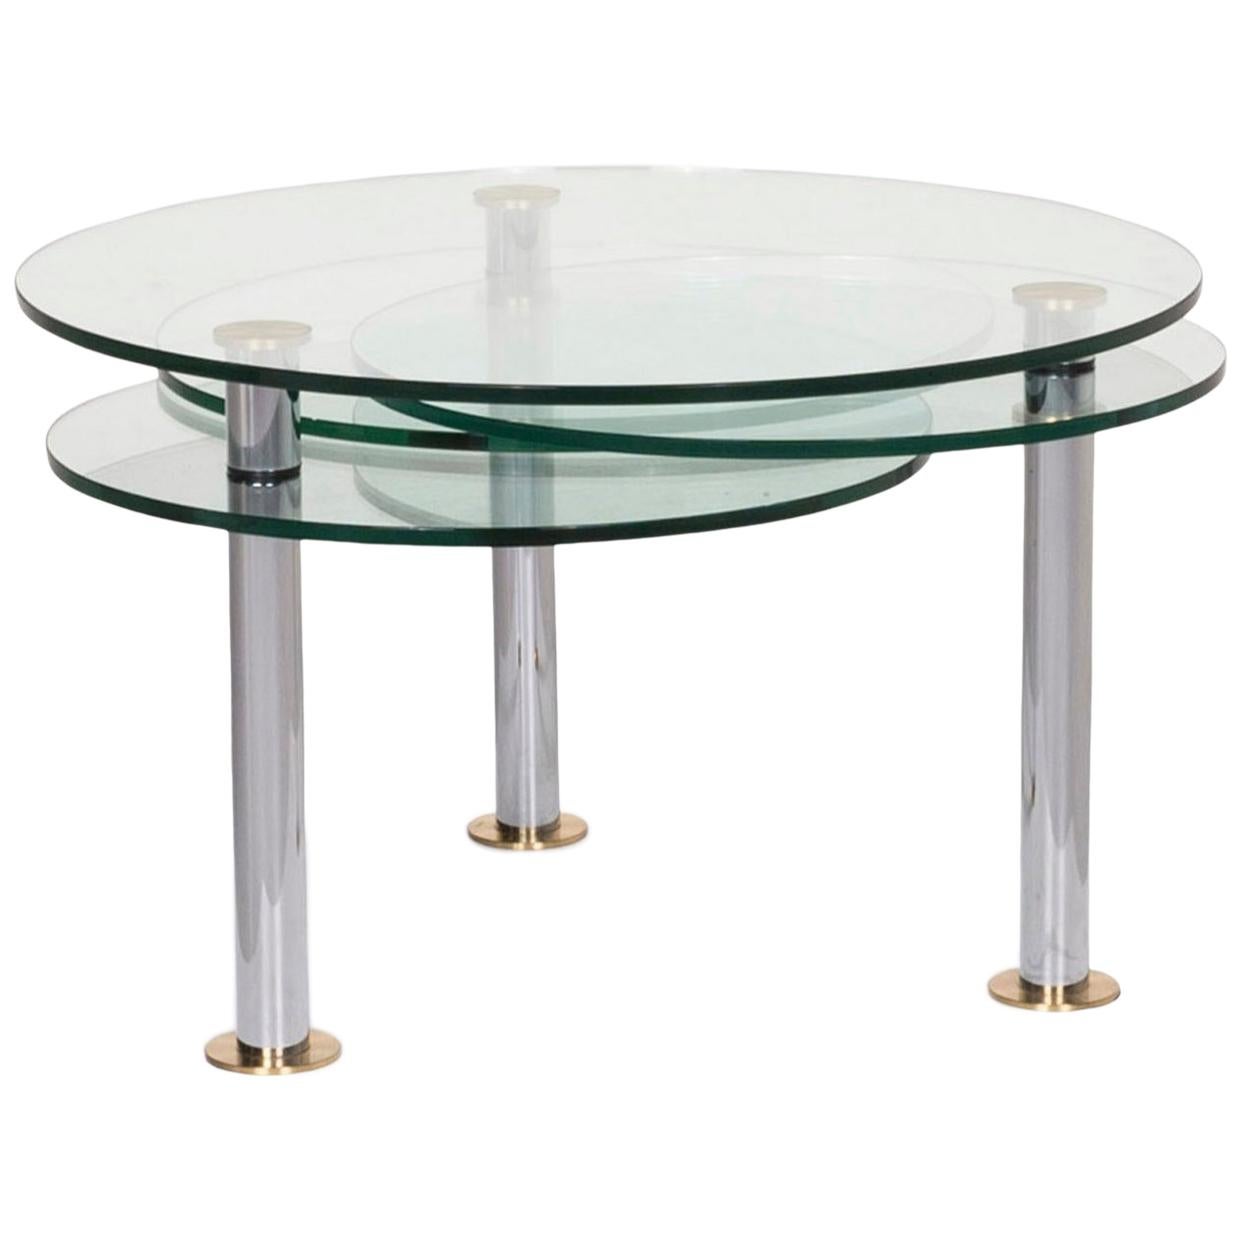 Draenert Glass Coffee Table Round Table Function Flexible For Sale